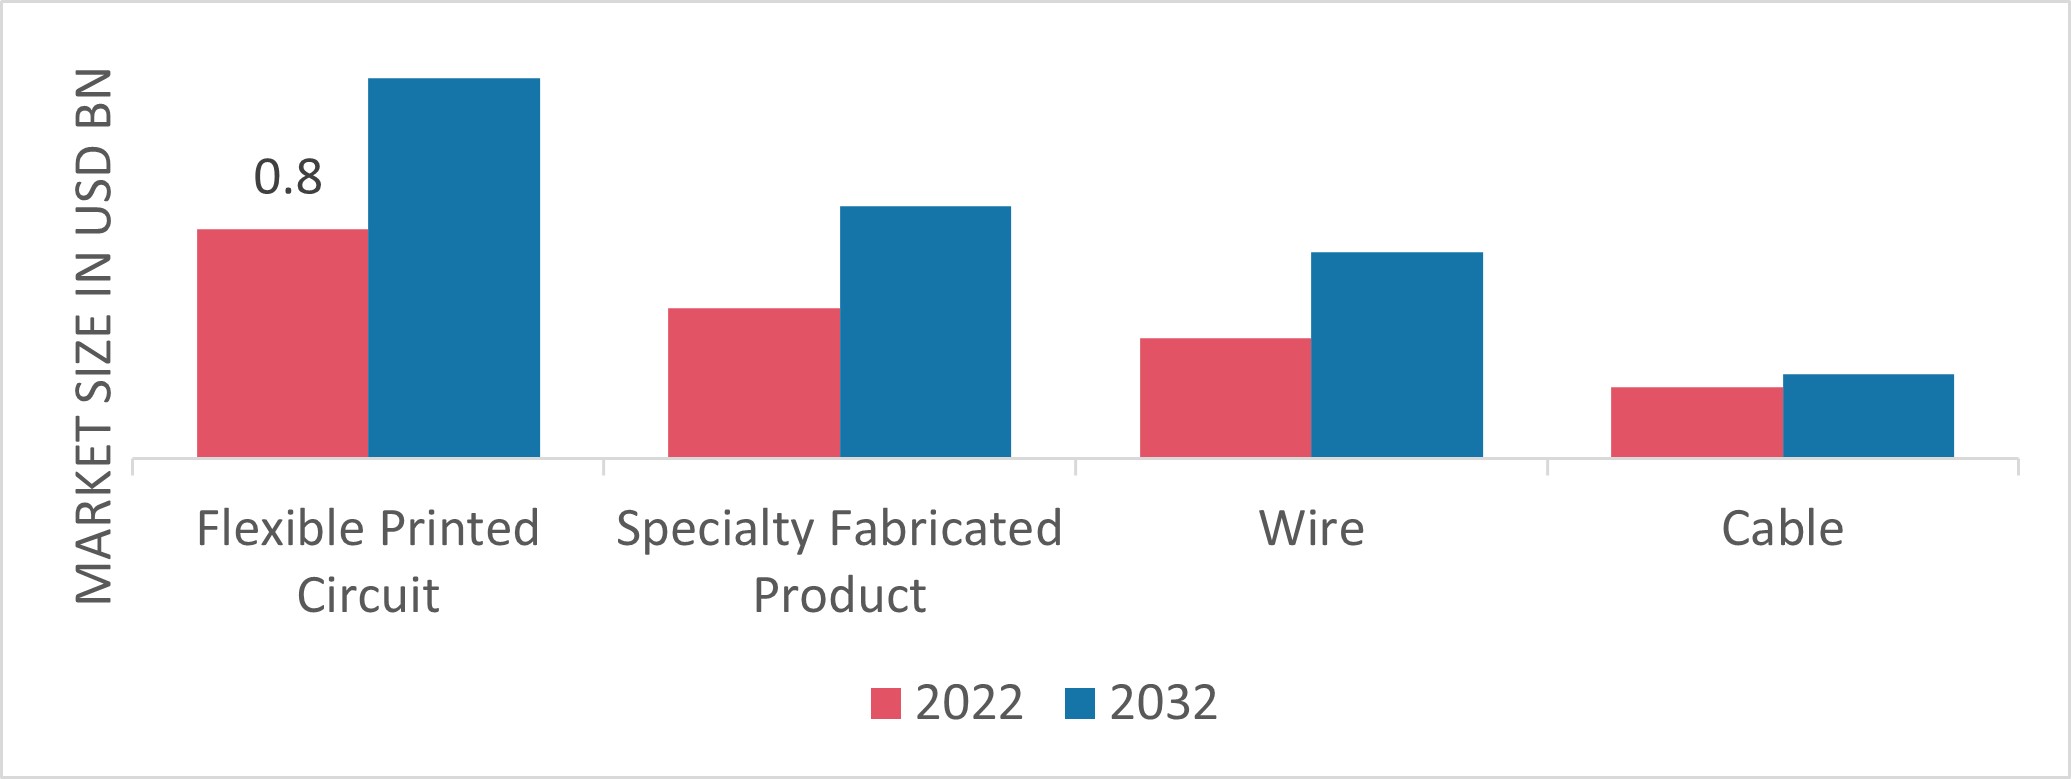 Polyimide Film Market, by Application, 2022 & 2032